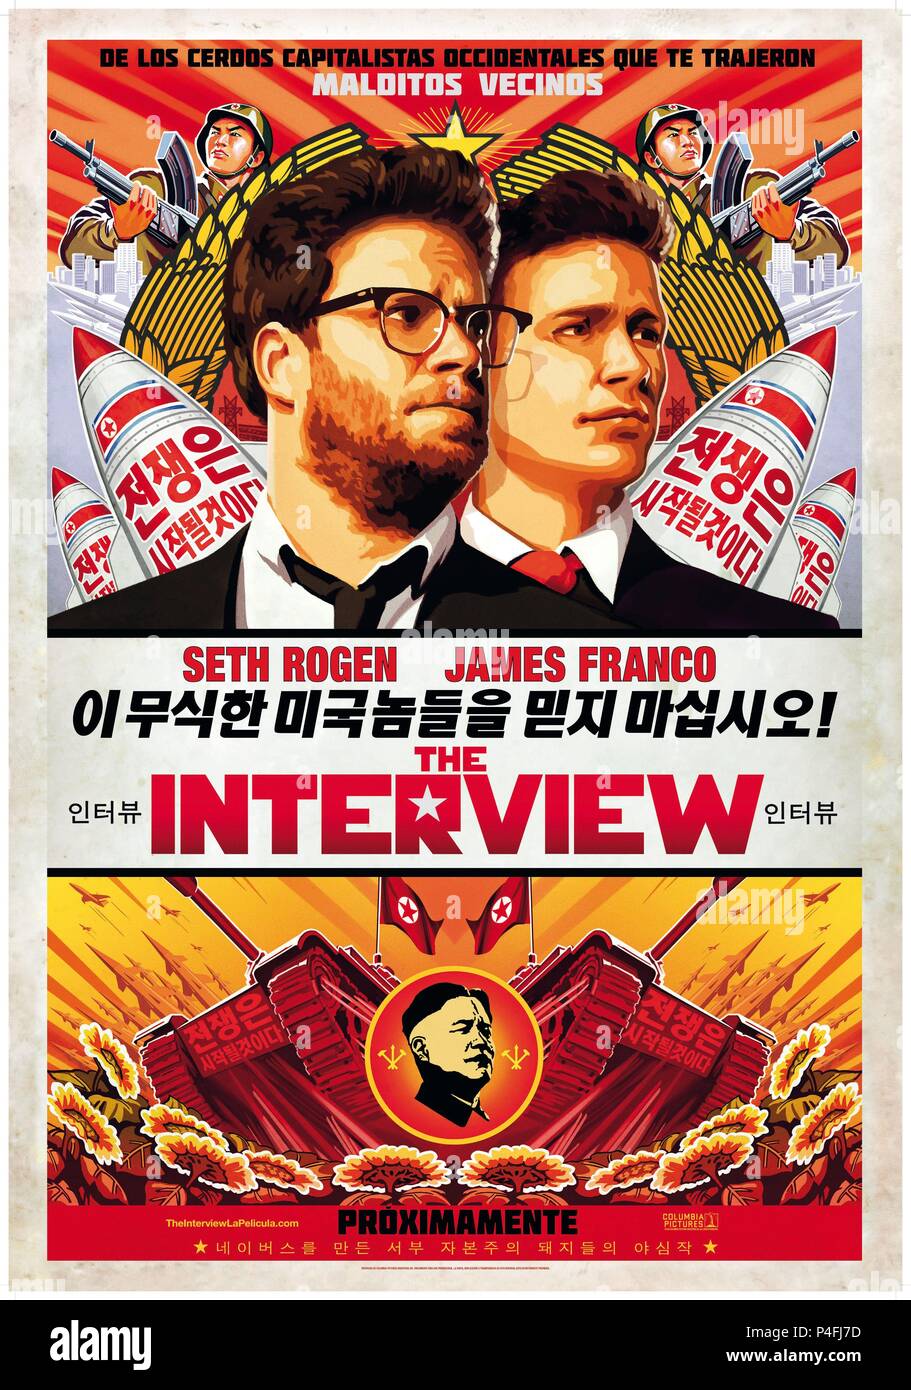 Original Film Title: THE INTERVIEW.  English Title: THE INTERVIEW.  Film Director: SETH ROGEN; EVAN GOLDBERG.  Year: 2014. Credit: COLUMBIA PICTURES/POINT GREY PICTURES / Album Stock Photo